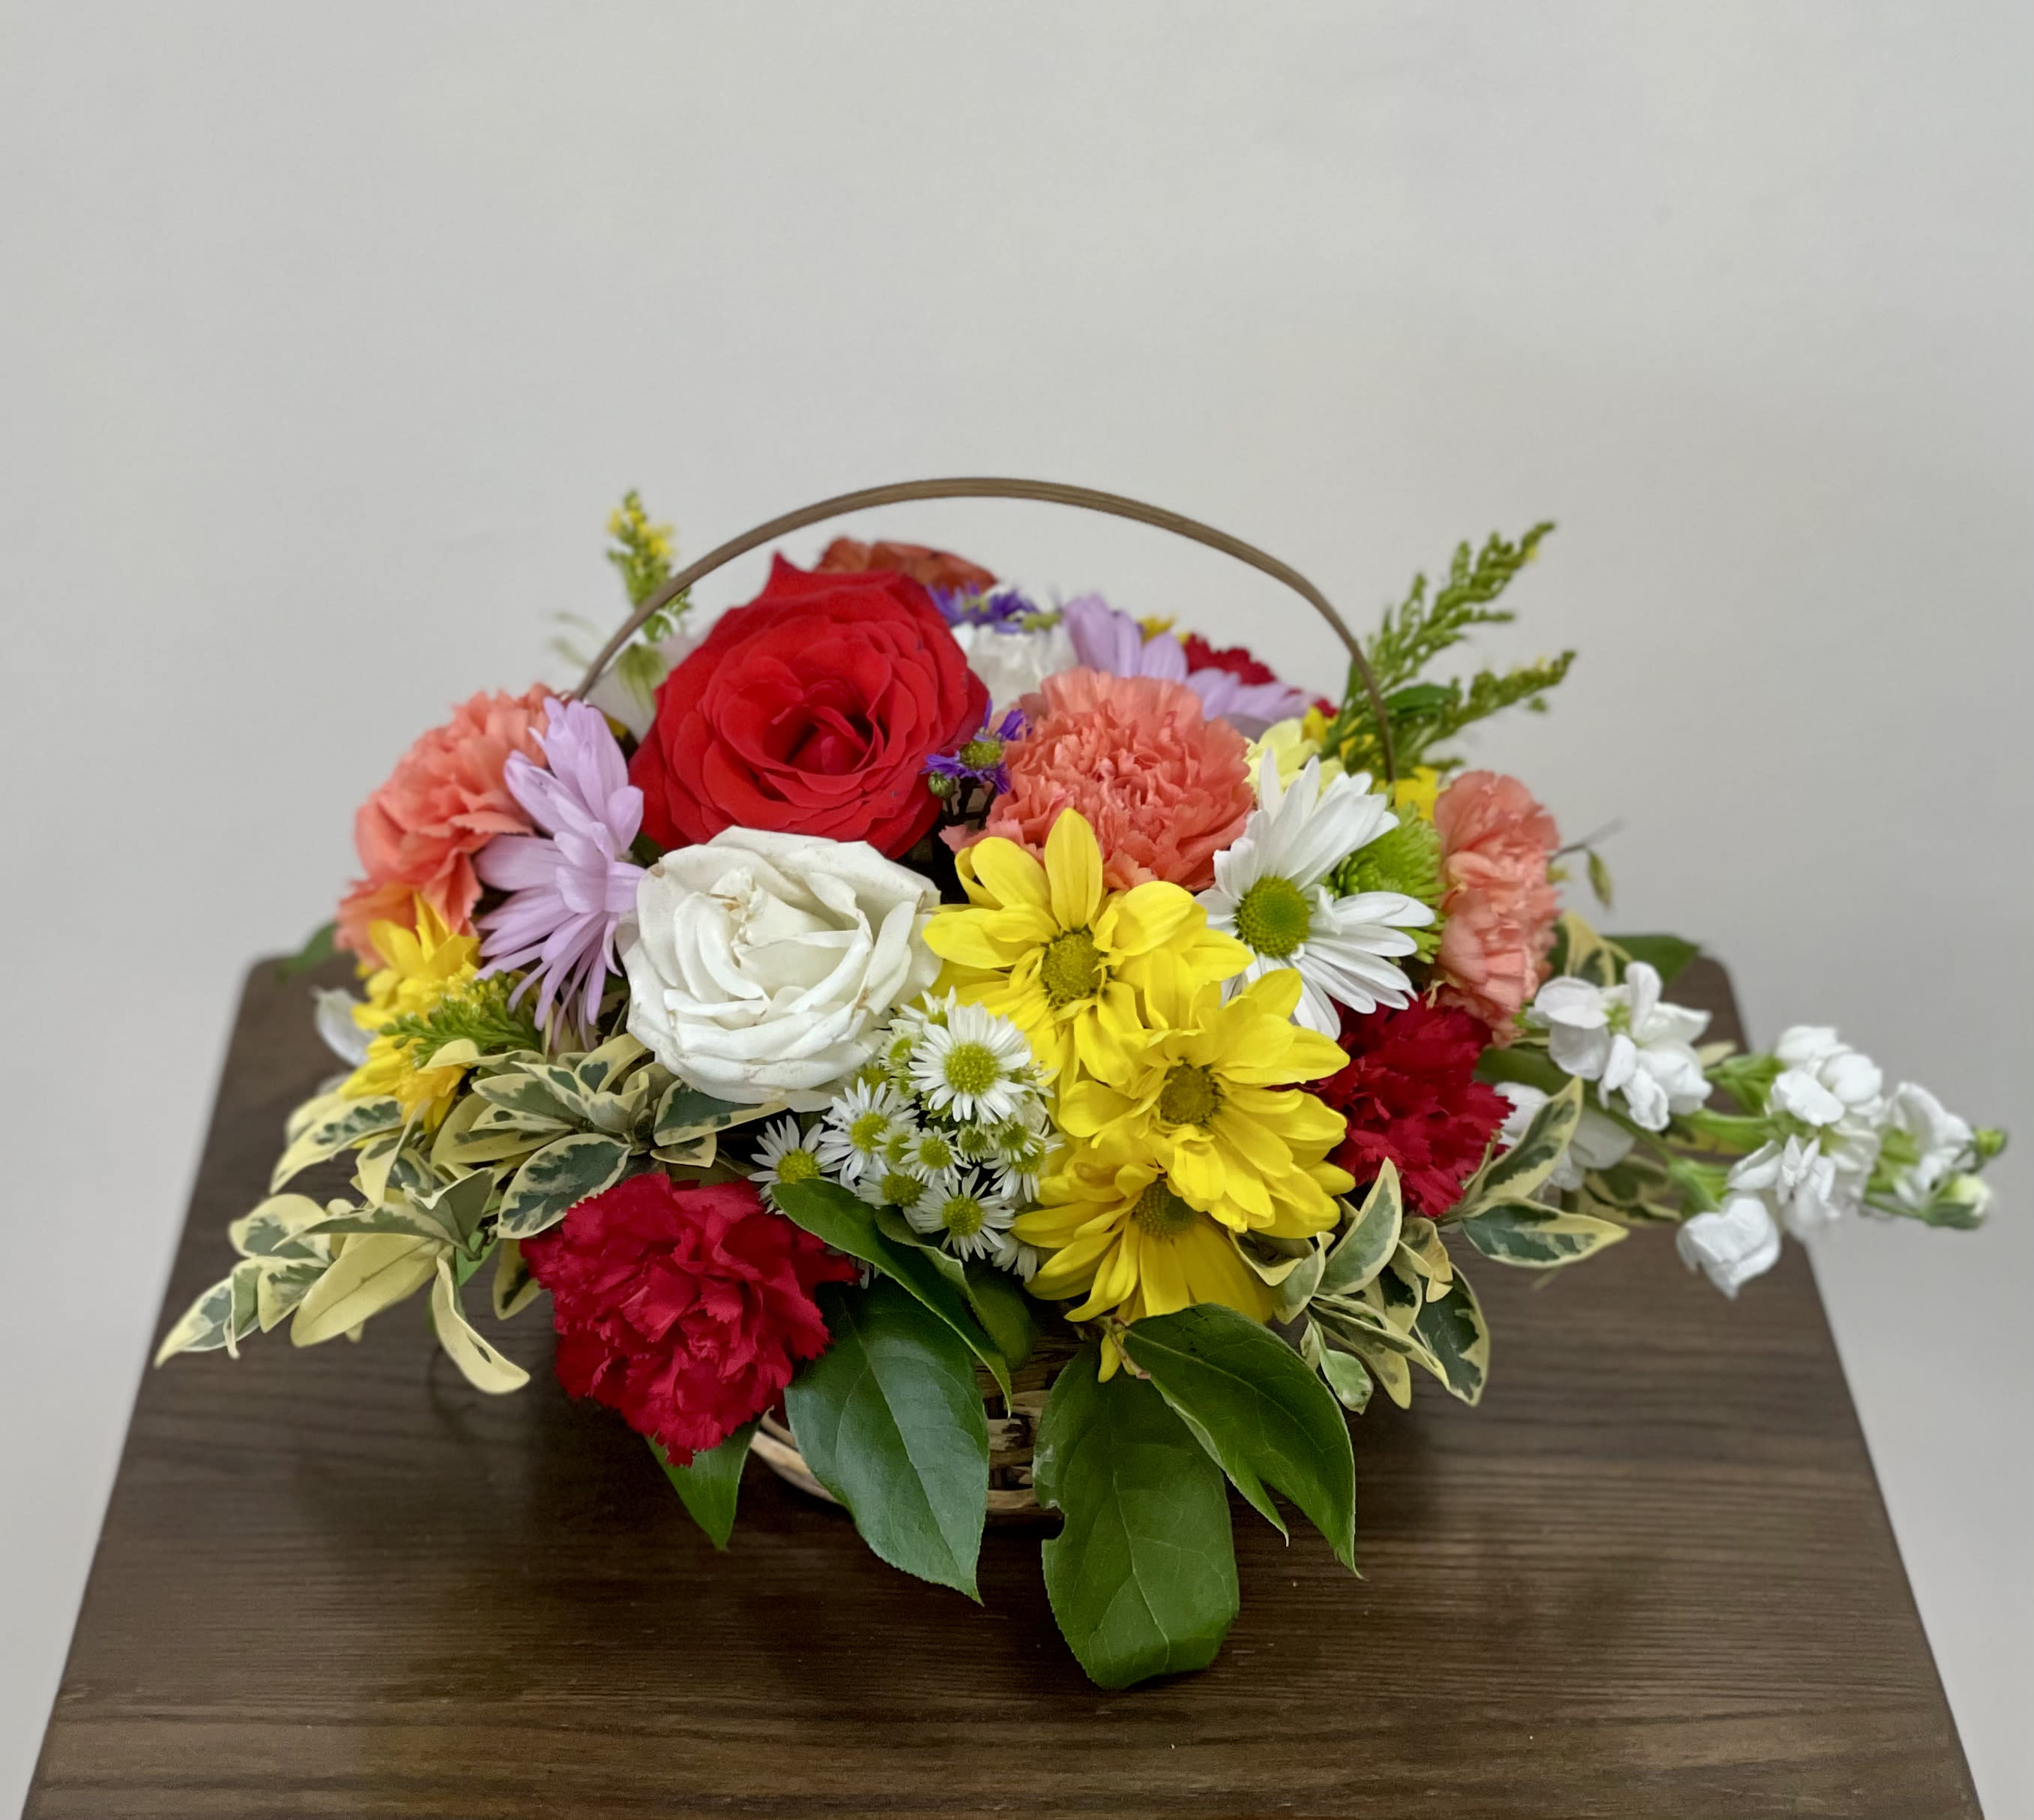 Basket of Spring  - Mixed flowers